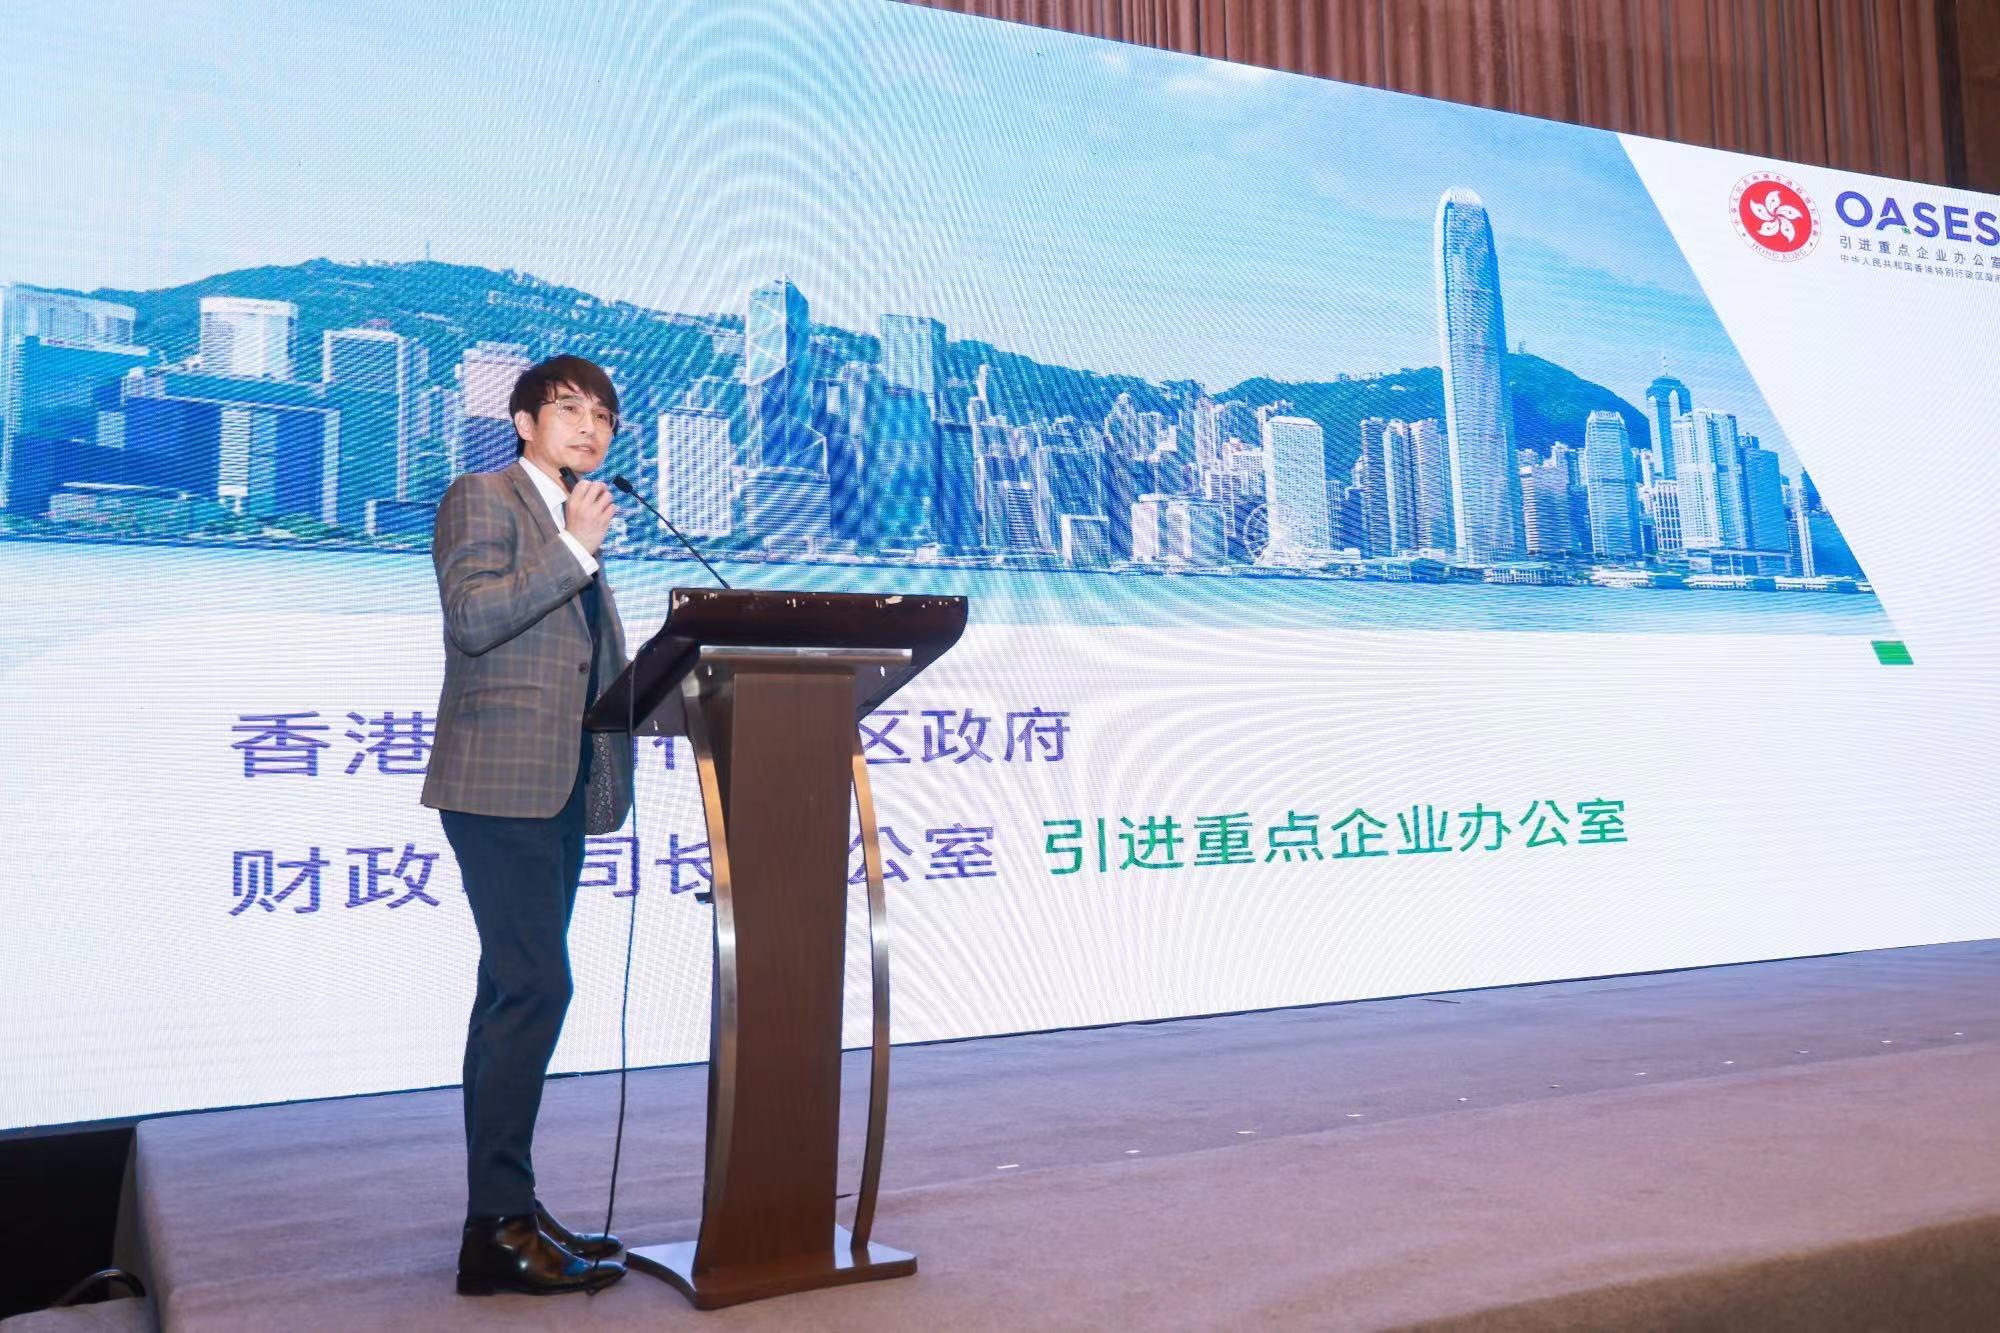 Invest Hong Kong and the Administrative Committee of Wuhan East Lake High-Tech Development Zone co-hosted a seminar in Wuhan, Hubei Province, today (March 21), encouraging local high-tech enterprises to make full use of Hong Kong's business advantages and opportunities in innovation development amid the Belt and Road Initiative and the Guangdong-Hong Kong-Macao Greater Bay Area development to expand overseas. Photo shows Vice President (Advanced Manufacturing and New Energy Technology) of the Office for Attracting Strategic Enterprises Mr Benjamin Wong presenting at the seminar. 
